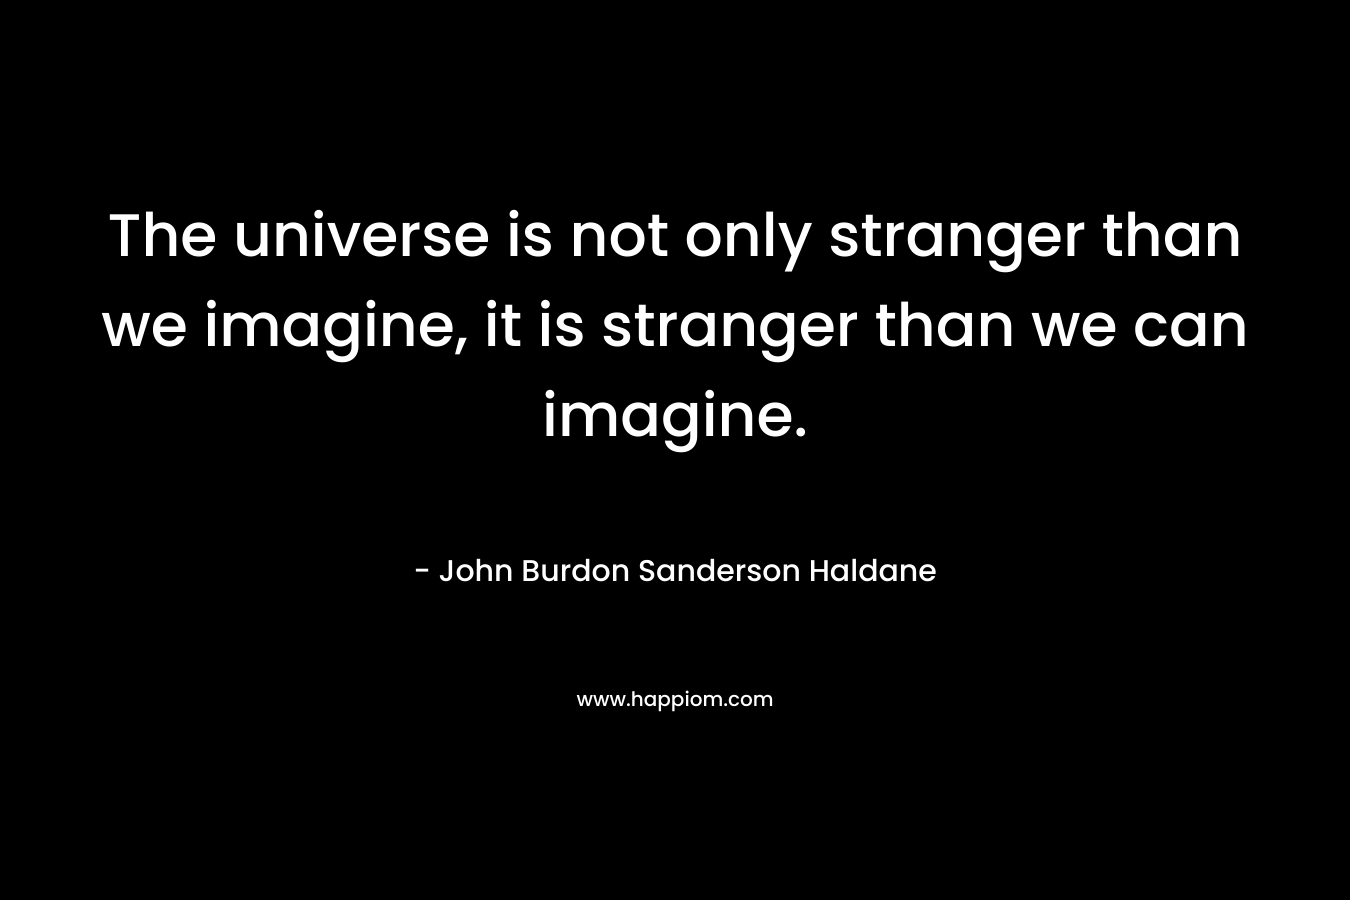 The universe is not only stranger than we imagine, it is stranger than we can imagine.